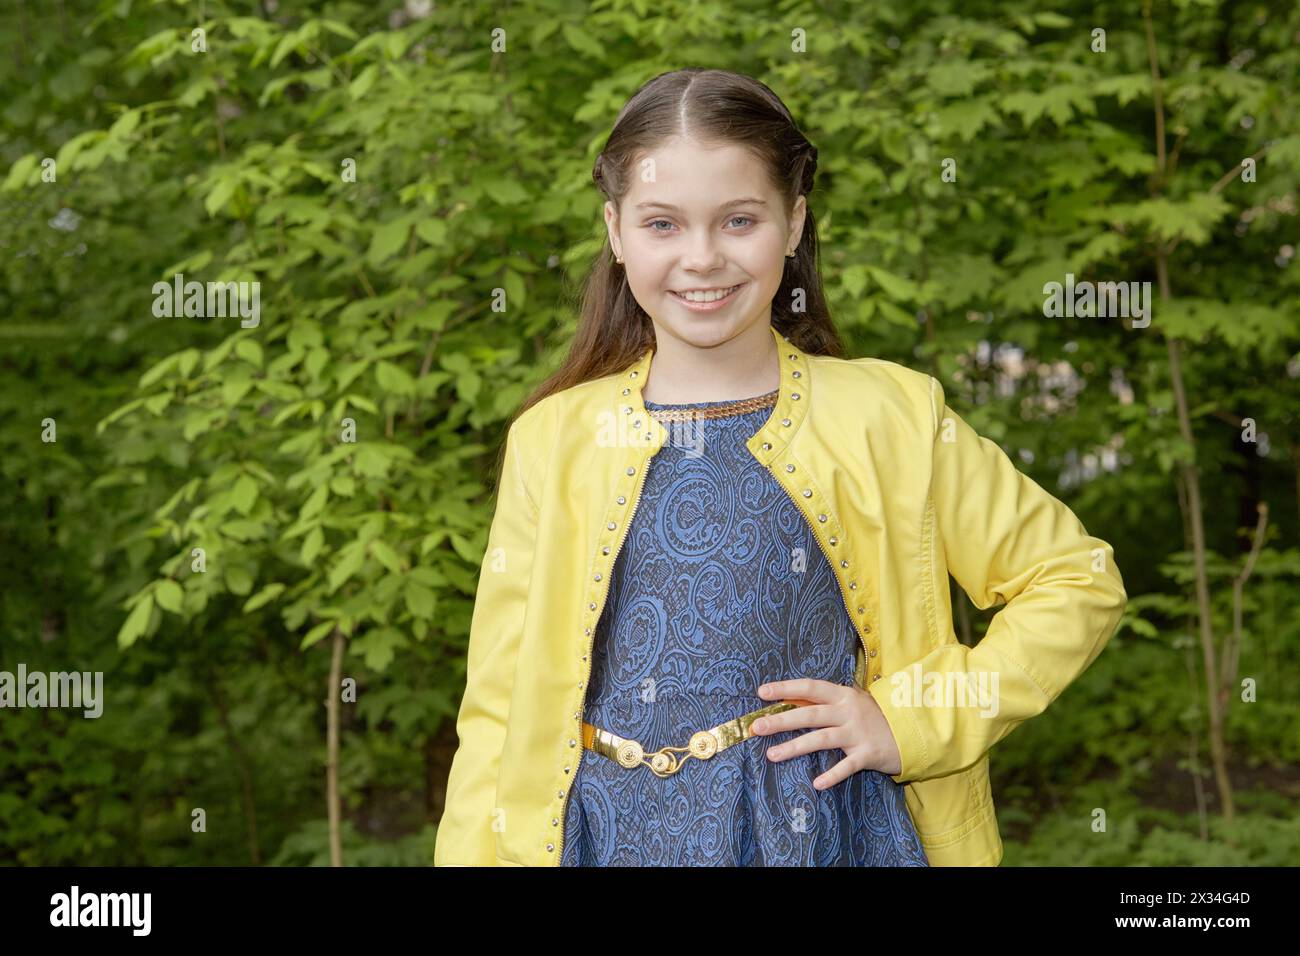 Half-length portrait of smiling girl in yellow jacket in green park. Stock Photo